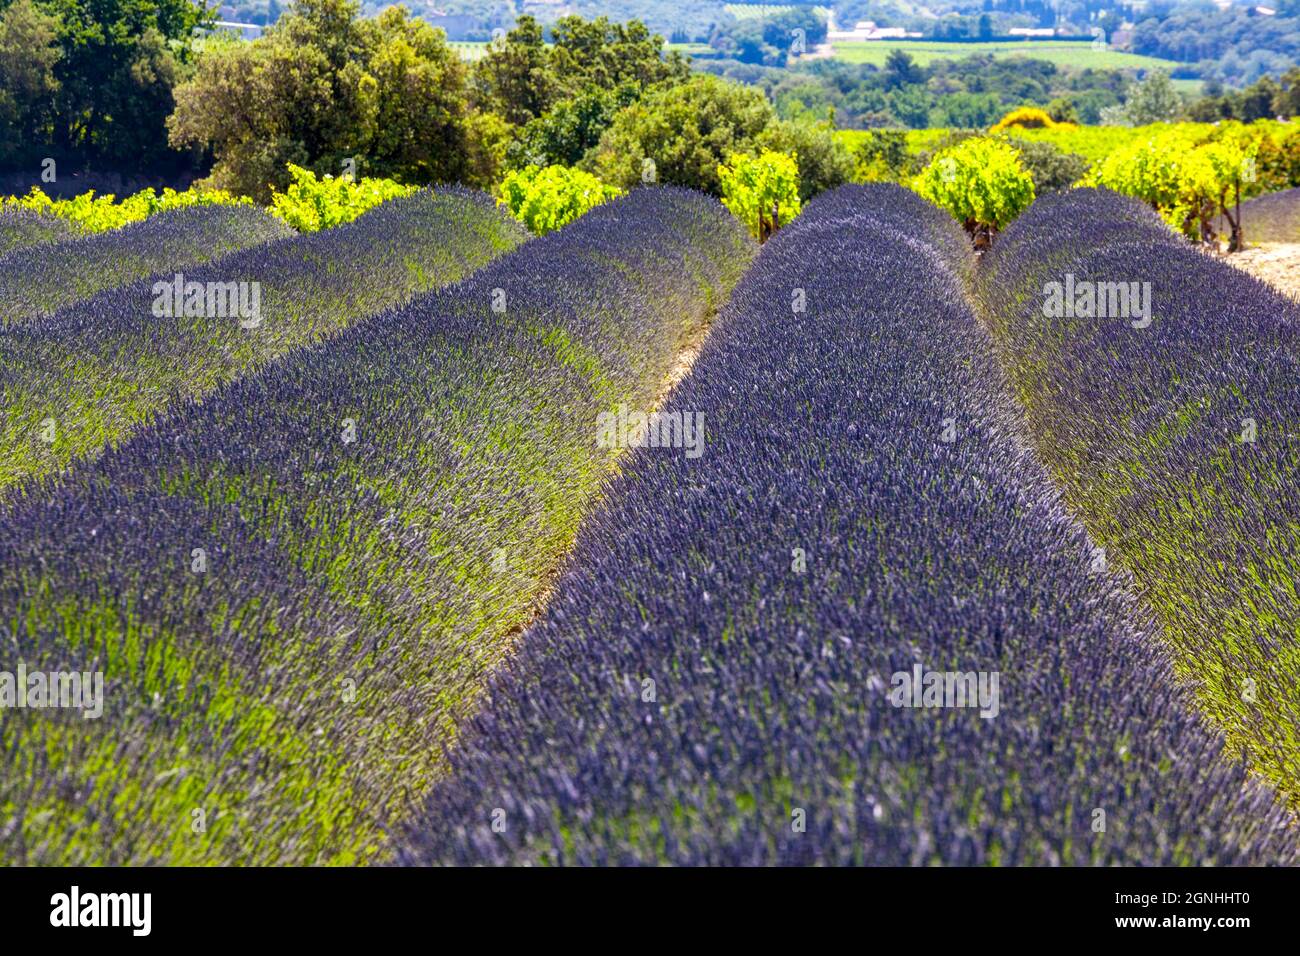 Lavender fields in provence france Stock Photo